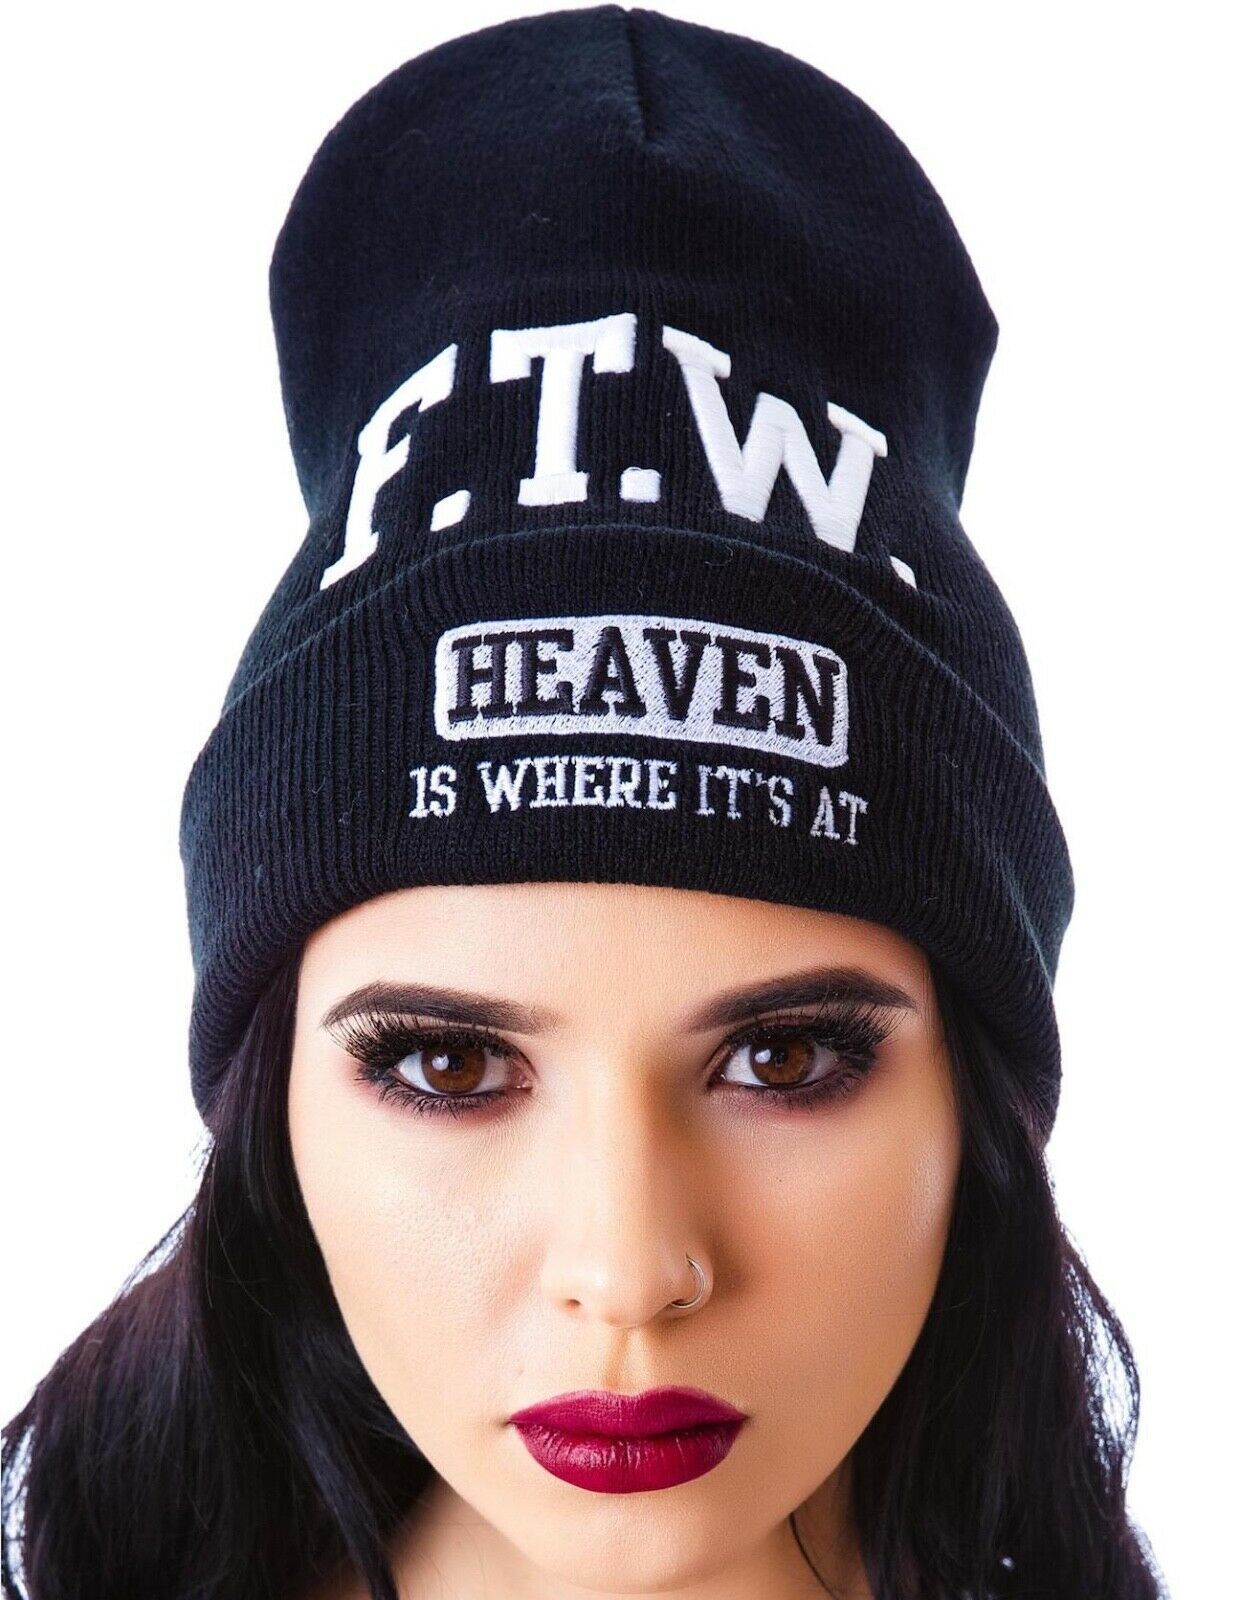 Primary image for UNIF Beanie Black F.T.W. Heaven is where it's at Unisex New